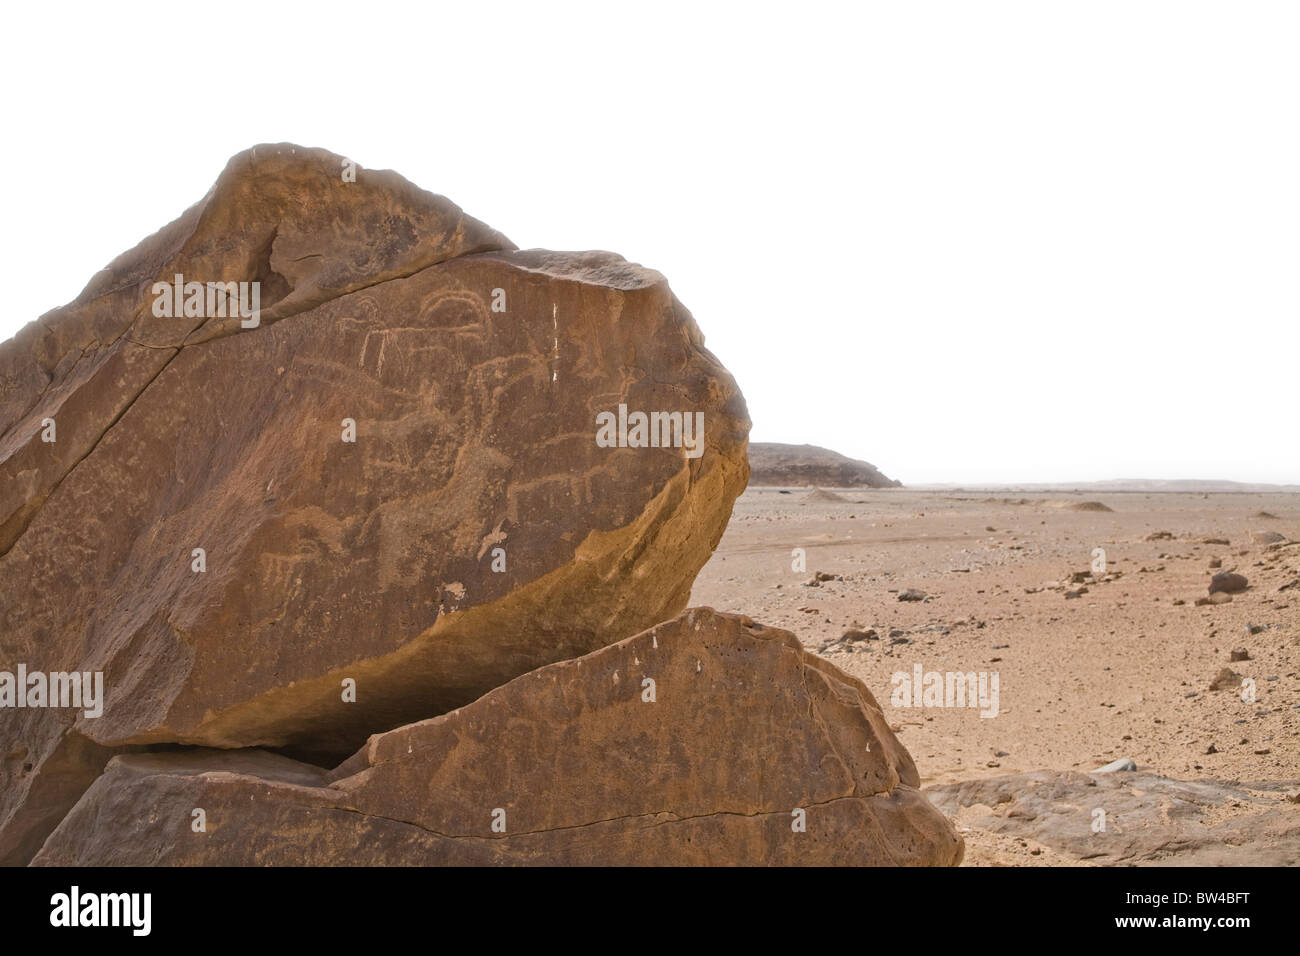 Images of animals scratched on rocks in a dry wadi bed in the Eastern Desert, Egypt Stock Photo